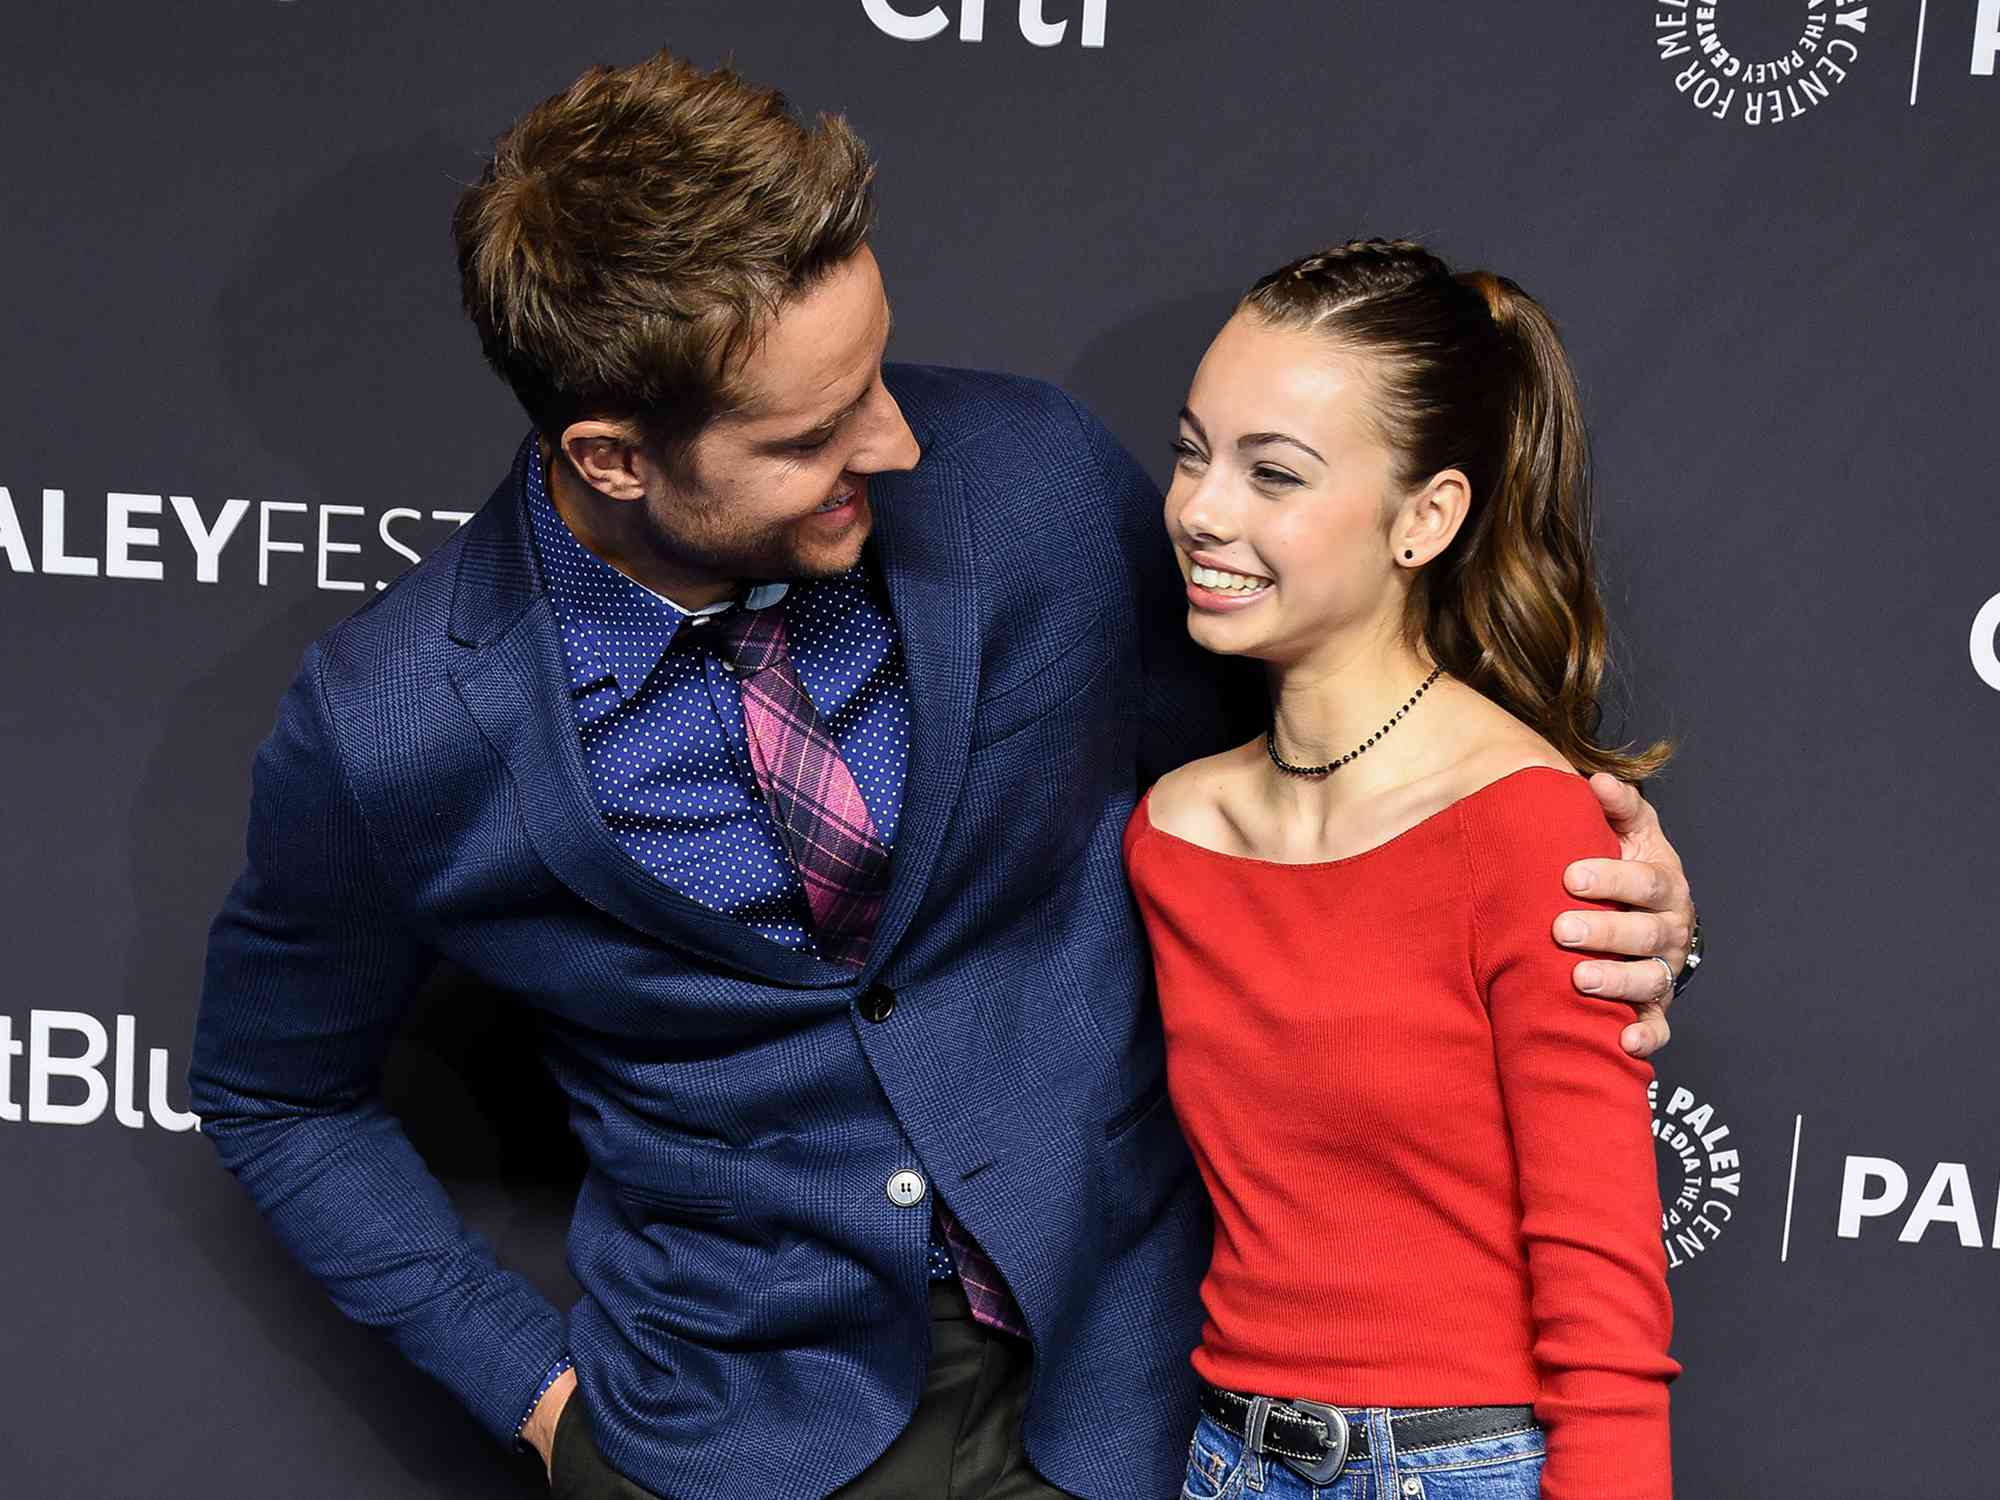 Justin Hartley and Isabella Justice Hartley attend The Paley Center For Media's 2019 PaleyFest LA - "This Is Us" at Dolby Theatre on March 24, 2019 in Hollywood, California